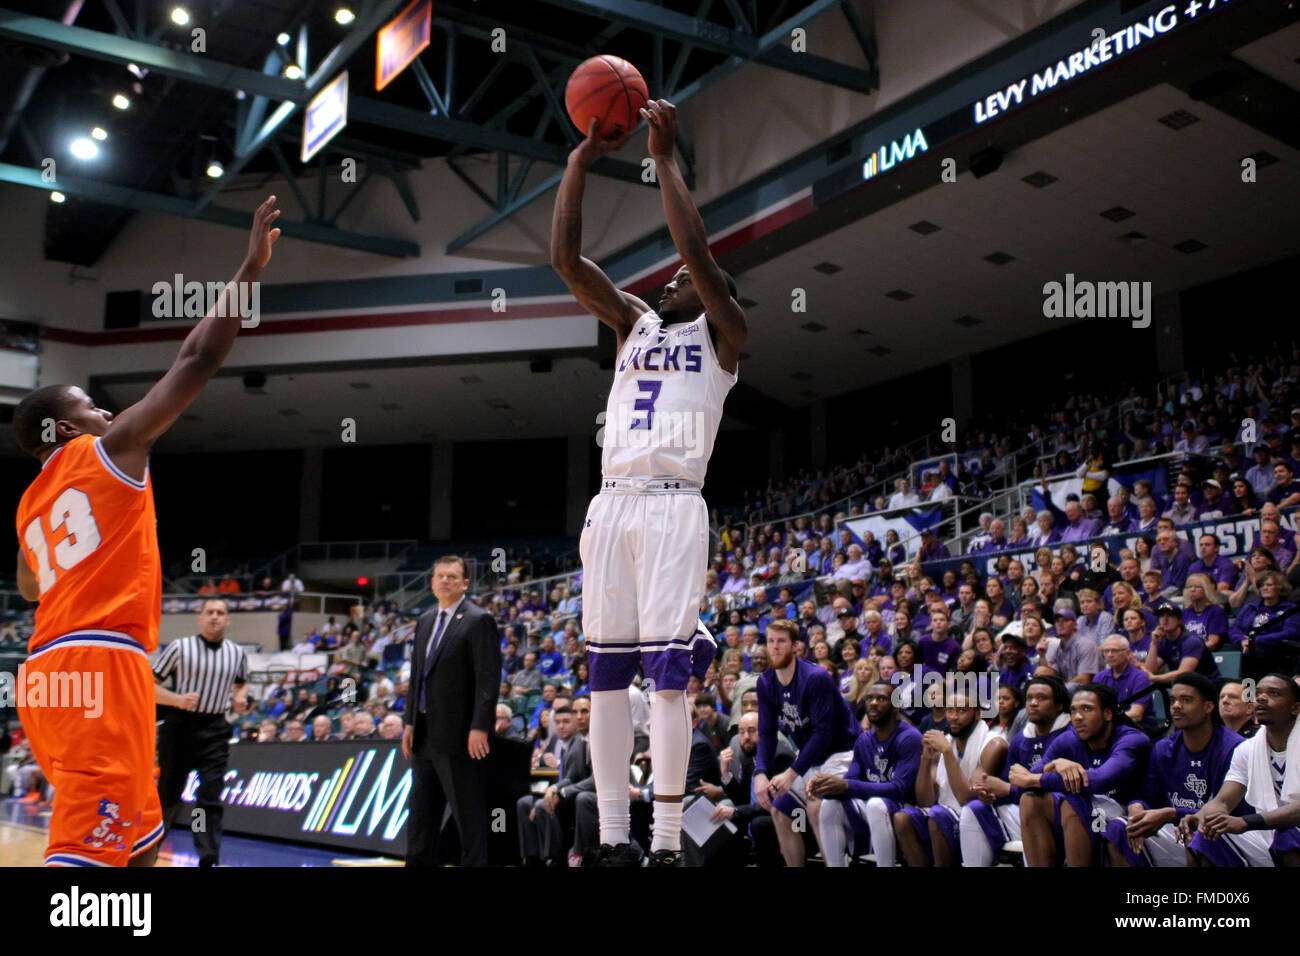 Katy, TX, USA. 11th Mar, 2016. Stephen F. Austin guard Jared Johnson (3) pulls up for a long three-point shot during the men's semifinal game of the Southland Basketball tournament between Stephen F. Austin and Houston Baptist from the Merrell Center in Katy, TX. Credit image: Erik Williams/Cal Sport Media. Credit:  csm/Alamy Live News Stock Photo